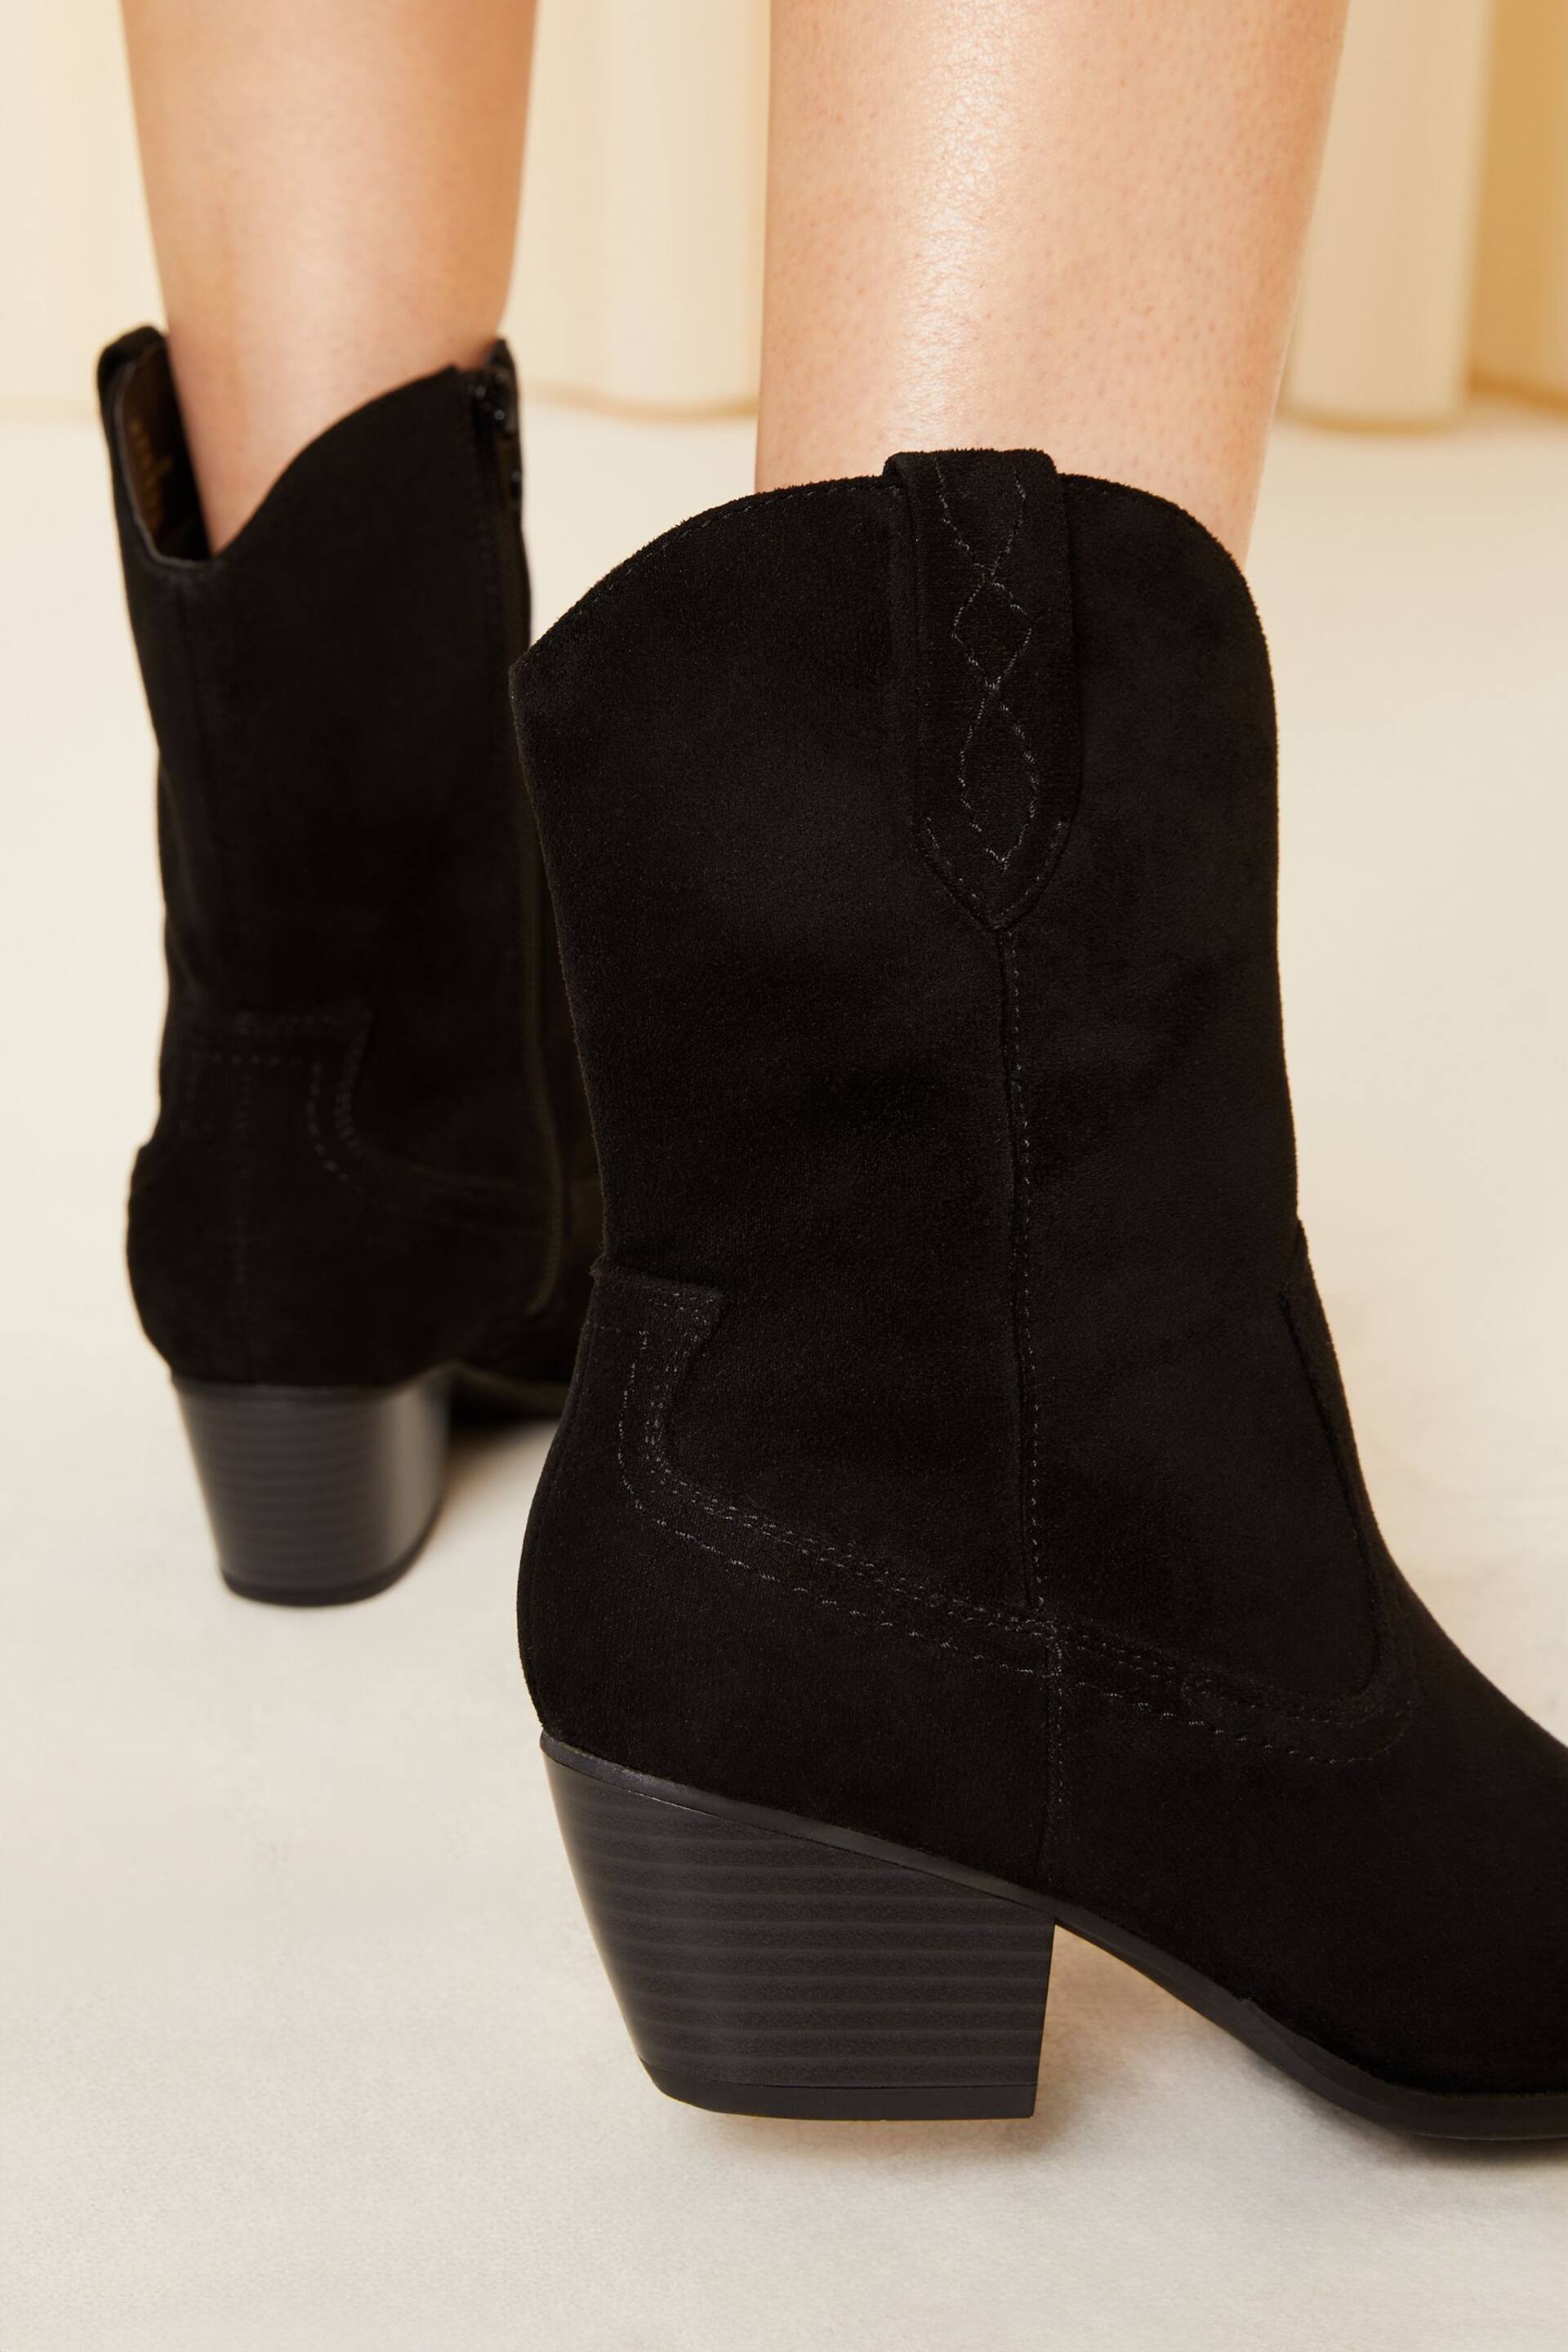 Friends Like These Black Faux Suede Mid Calf Cowboy Boot - Image 2 of 4